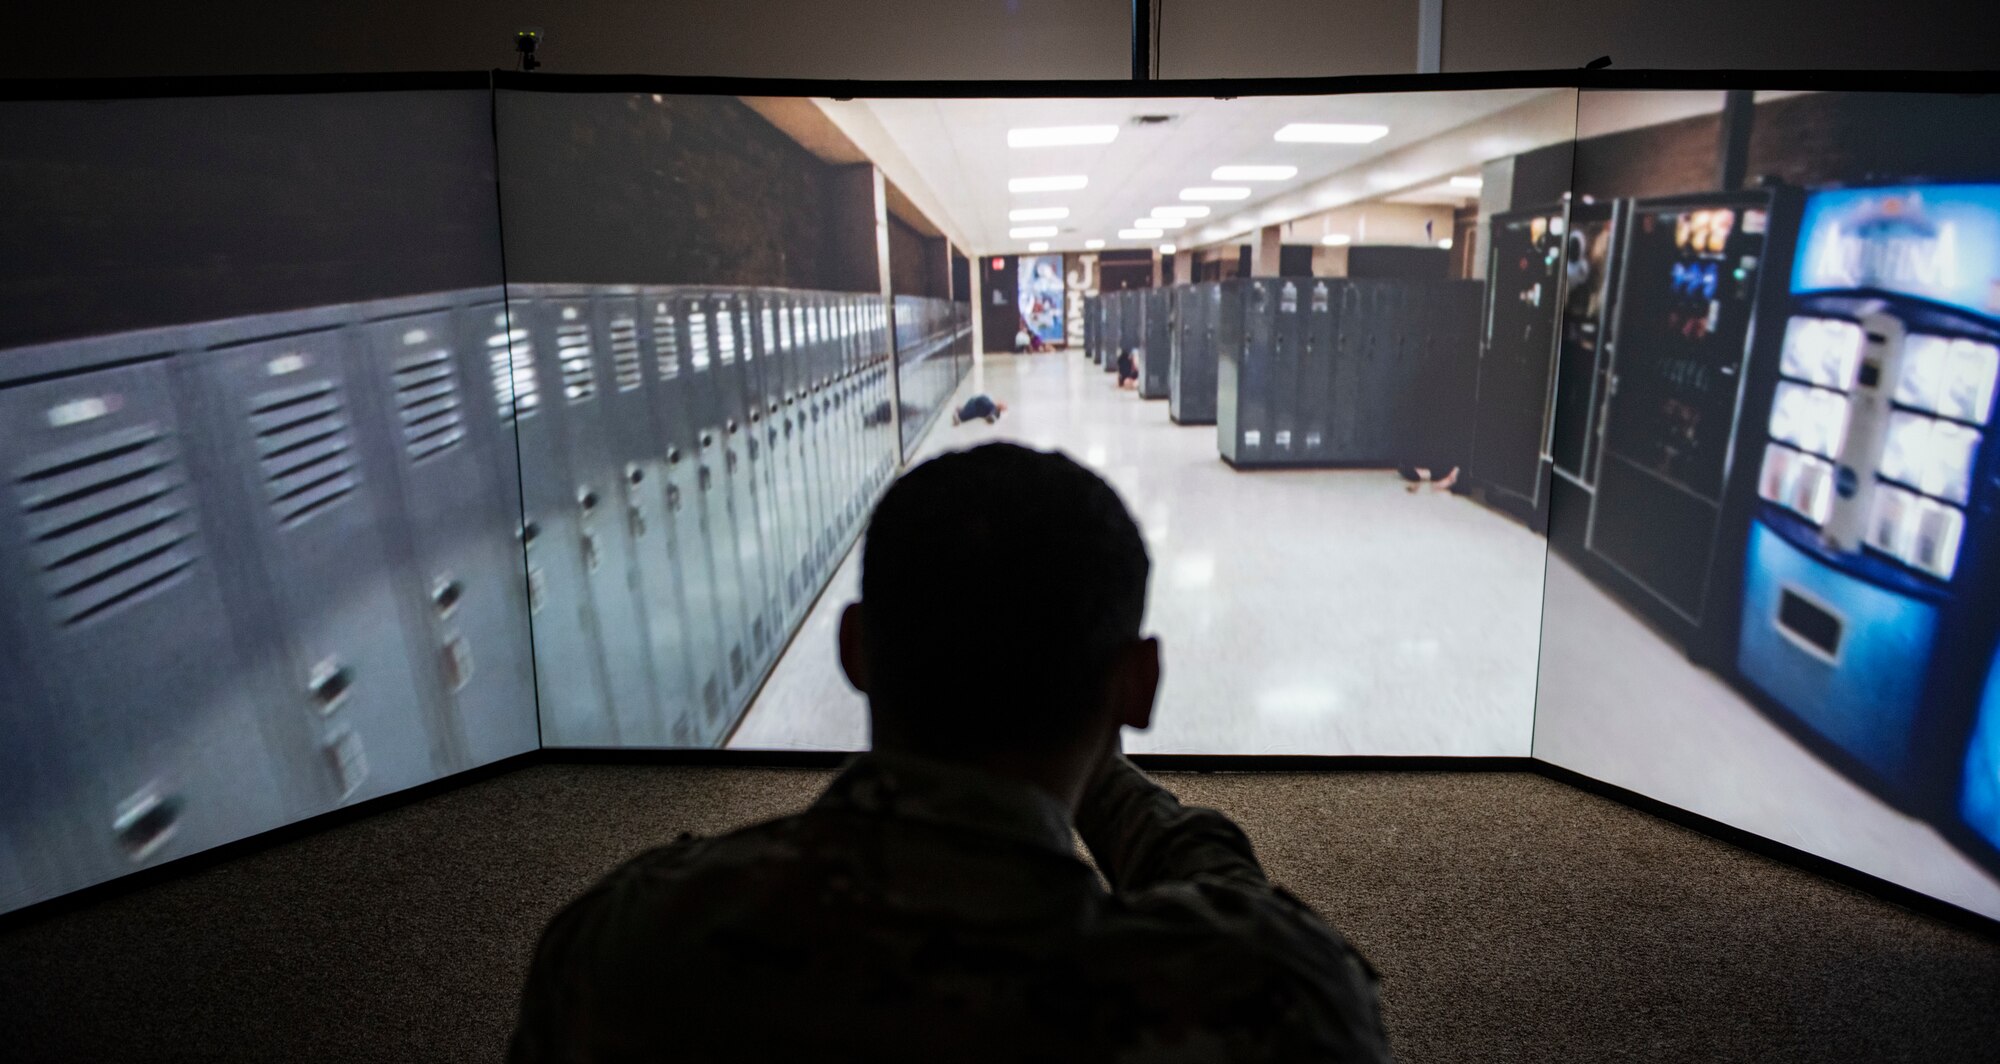 U.S. Air Force Staff Sgt. Thomas Badders, 325th Security Forces Squadron noncommissioned officer in charge of confinement, makes his way through a virtual active shooter training scenario at Tyndall Air Force Base, Florida, Feb. 5, 2020. Security Forces uses the Multiple Interactive Learning/Training Objectives Range to put it’s members in a life-like scenario. (U.S. Air Force photo by Senior Airman Stefan Alvarez)